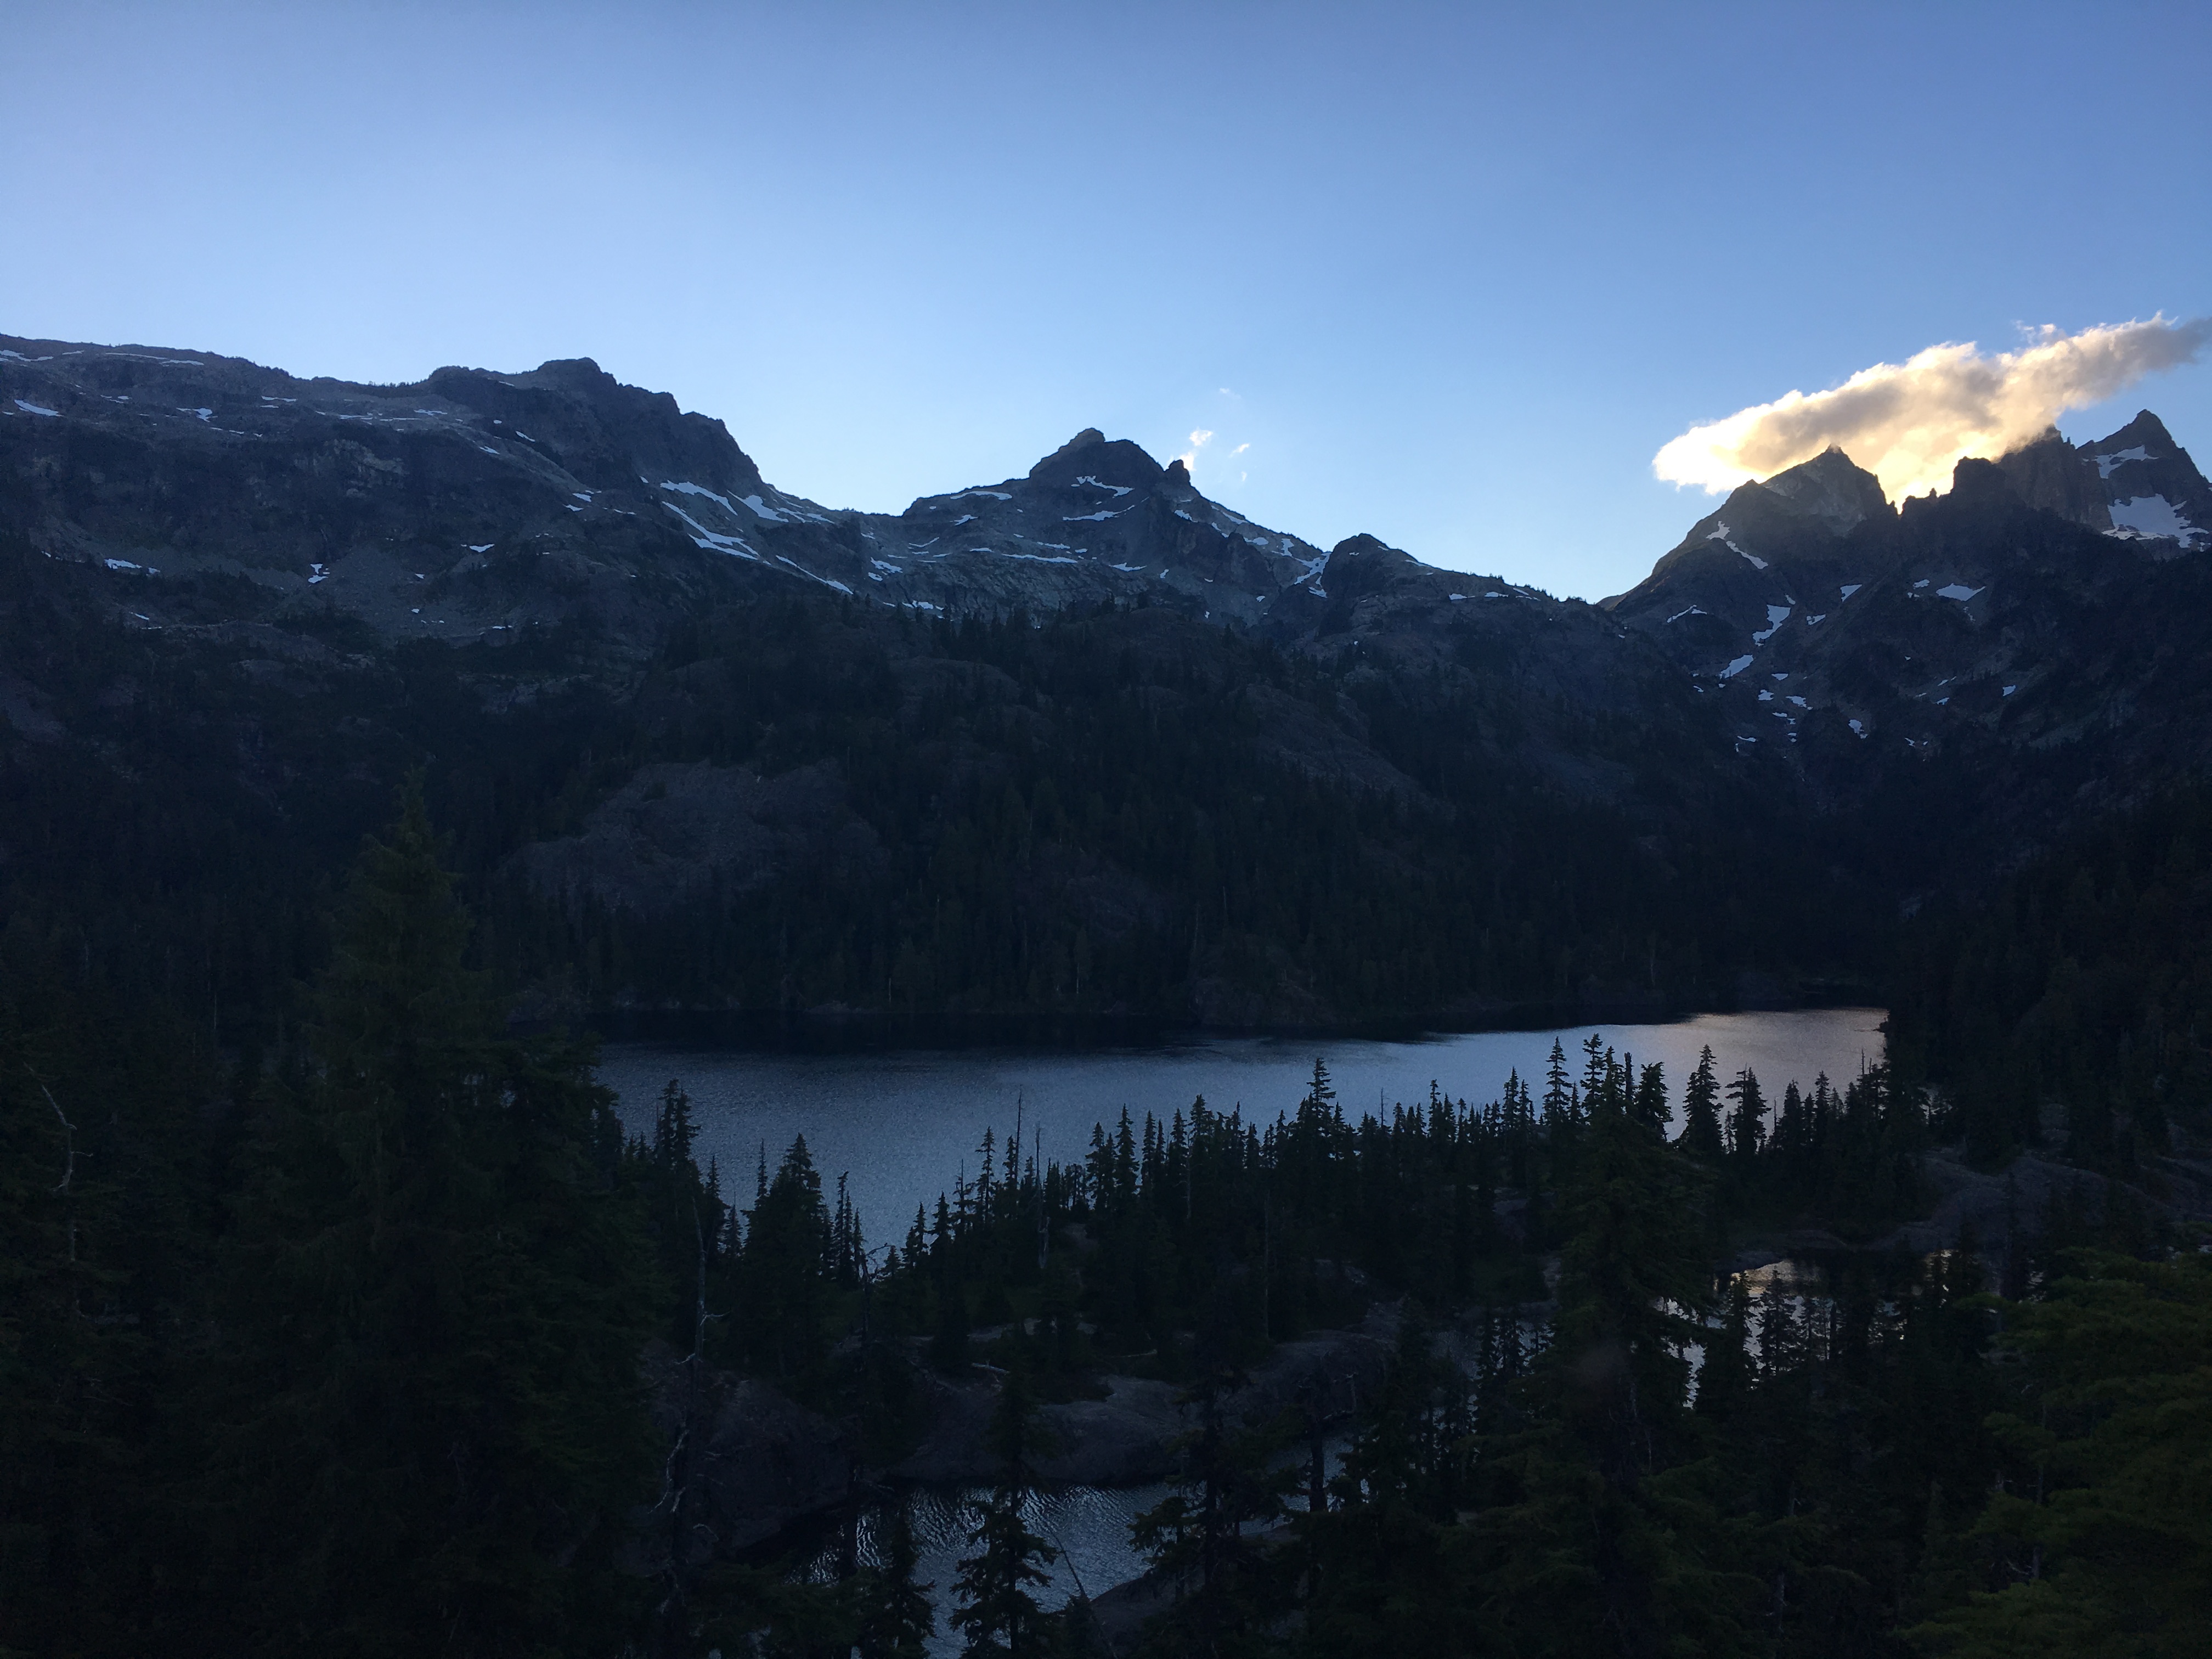 Spectacle Lake on Stevens Pass to Snoqualmie Pass adventure